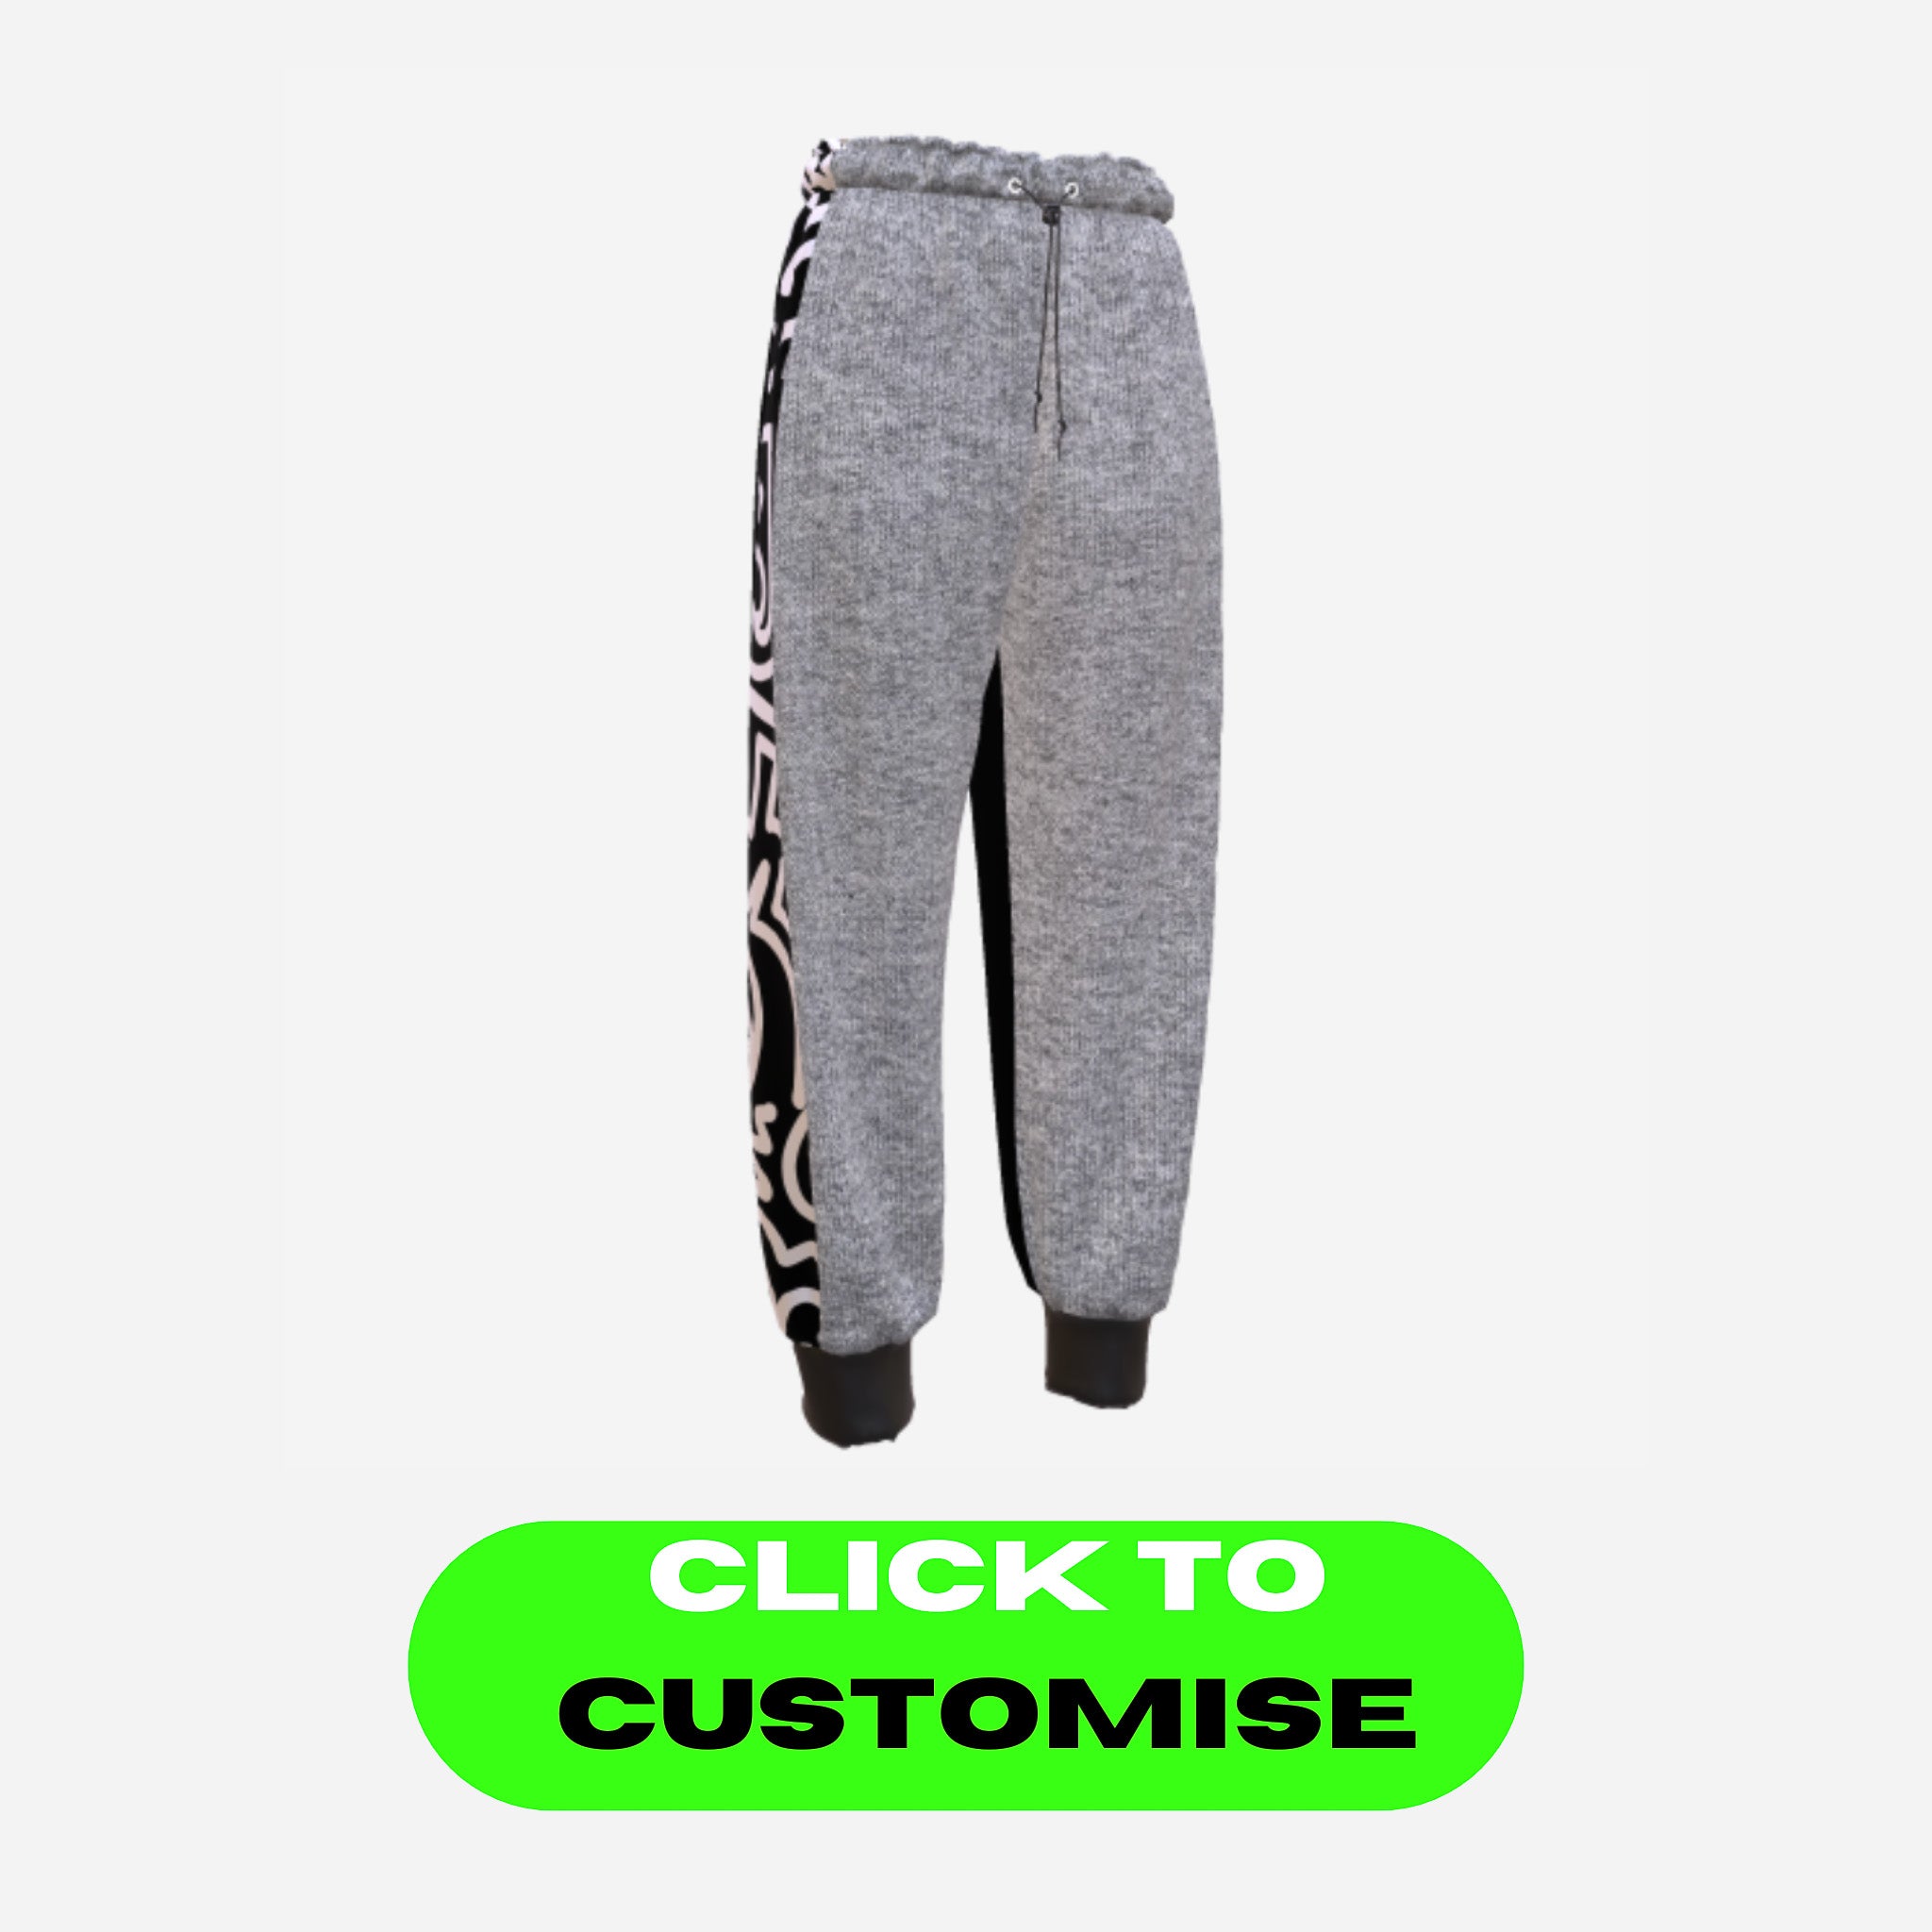 DYO Baggy Side Panel Tracksuit Bottoms 1.0